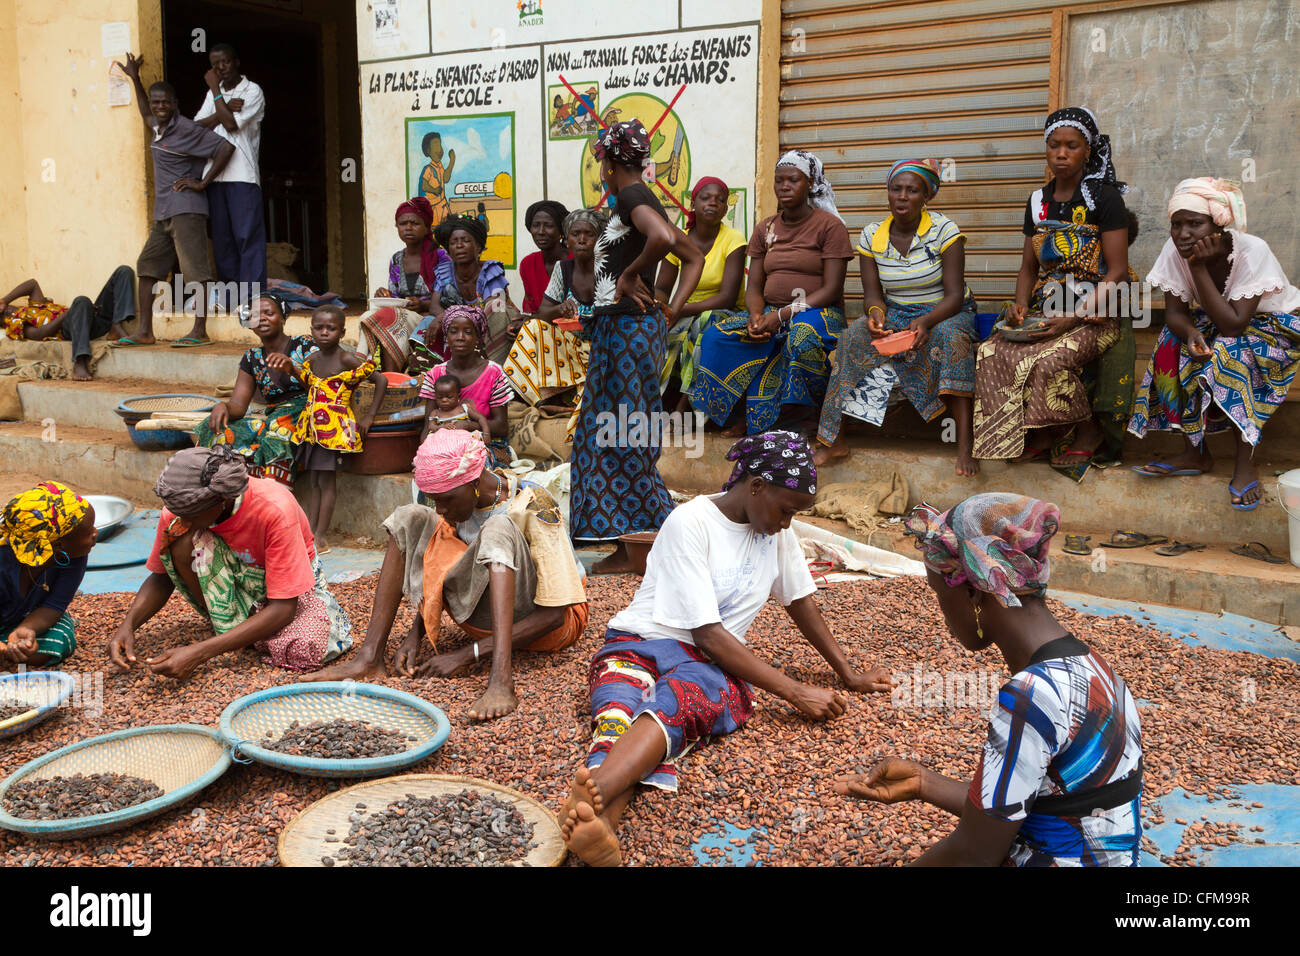 Women sorting  beans of cacao in front of a public notice against the child labor ,Duekoue, Ivory Coast ,Cote d'Ivoire, Stock Photo